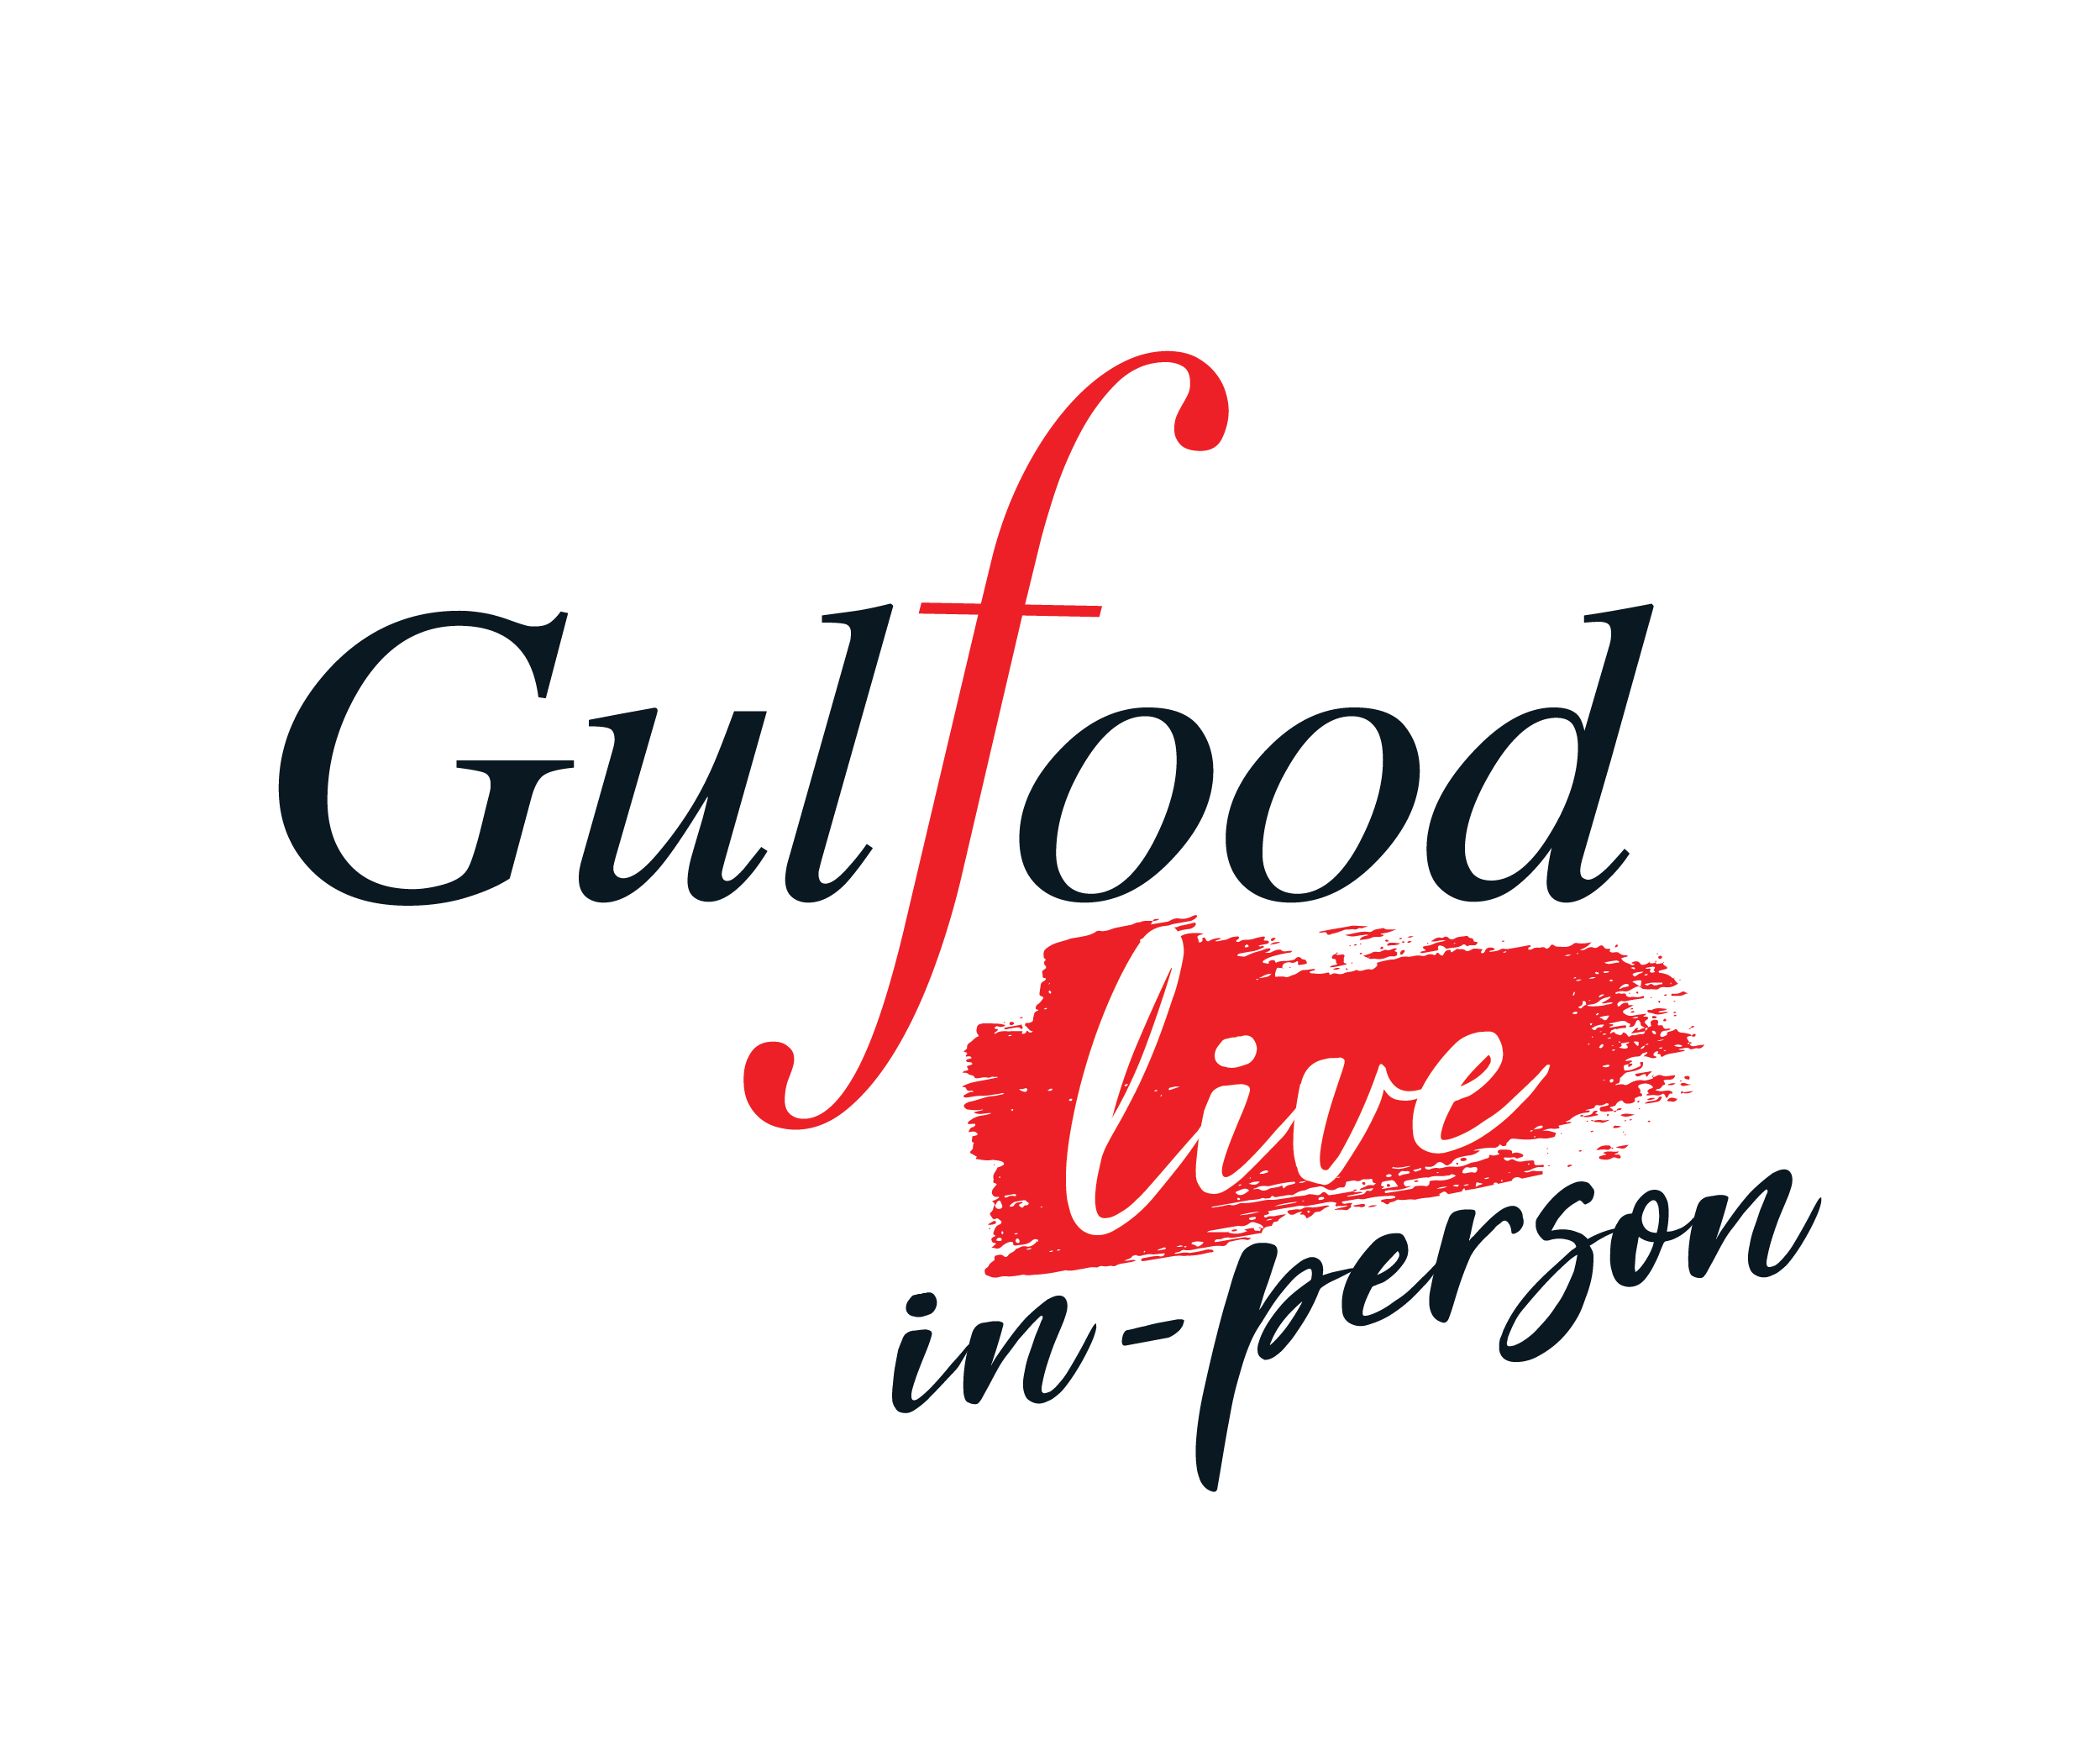 Welcome - Gulfood 2021 - Join us live in-person